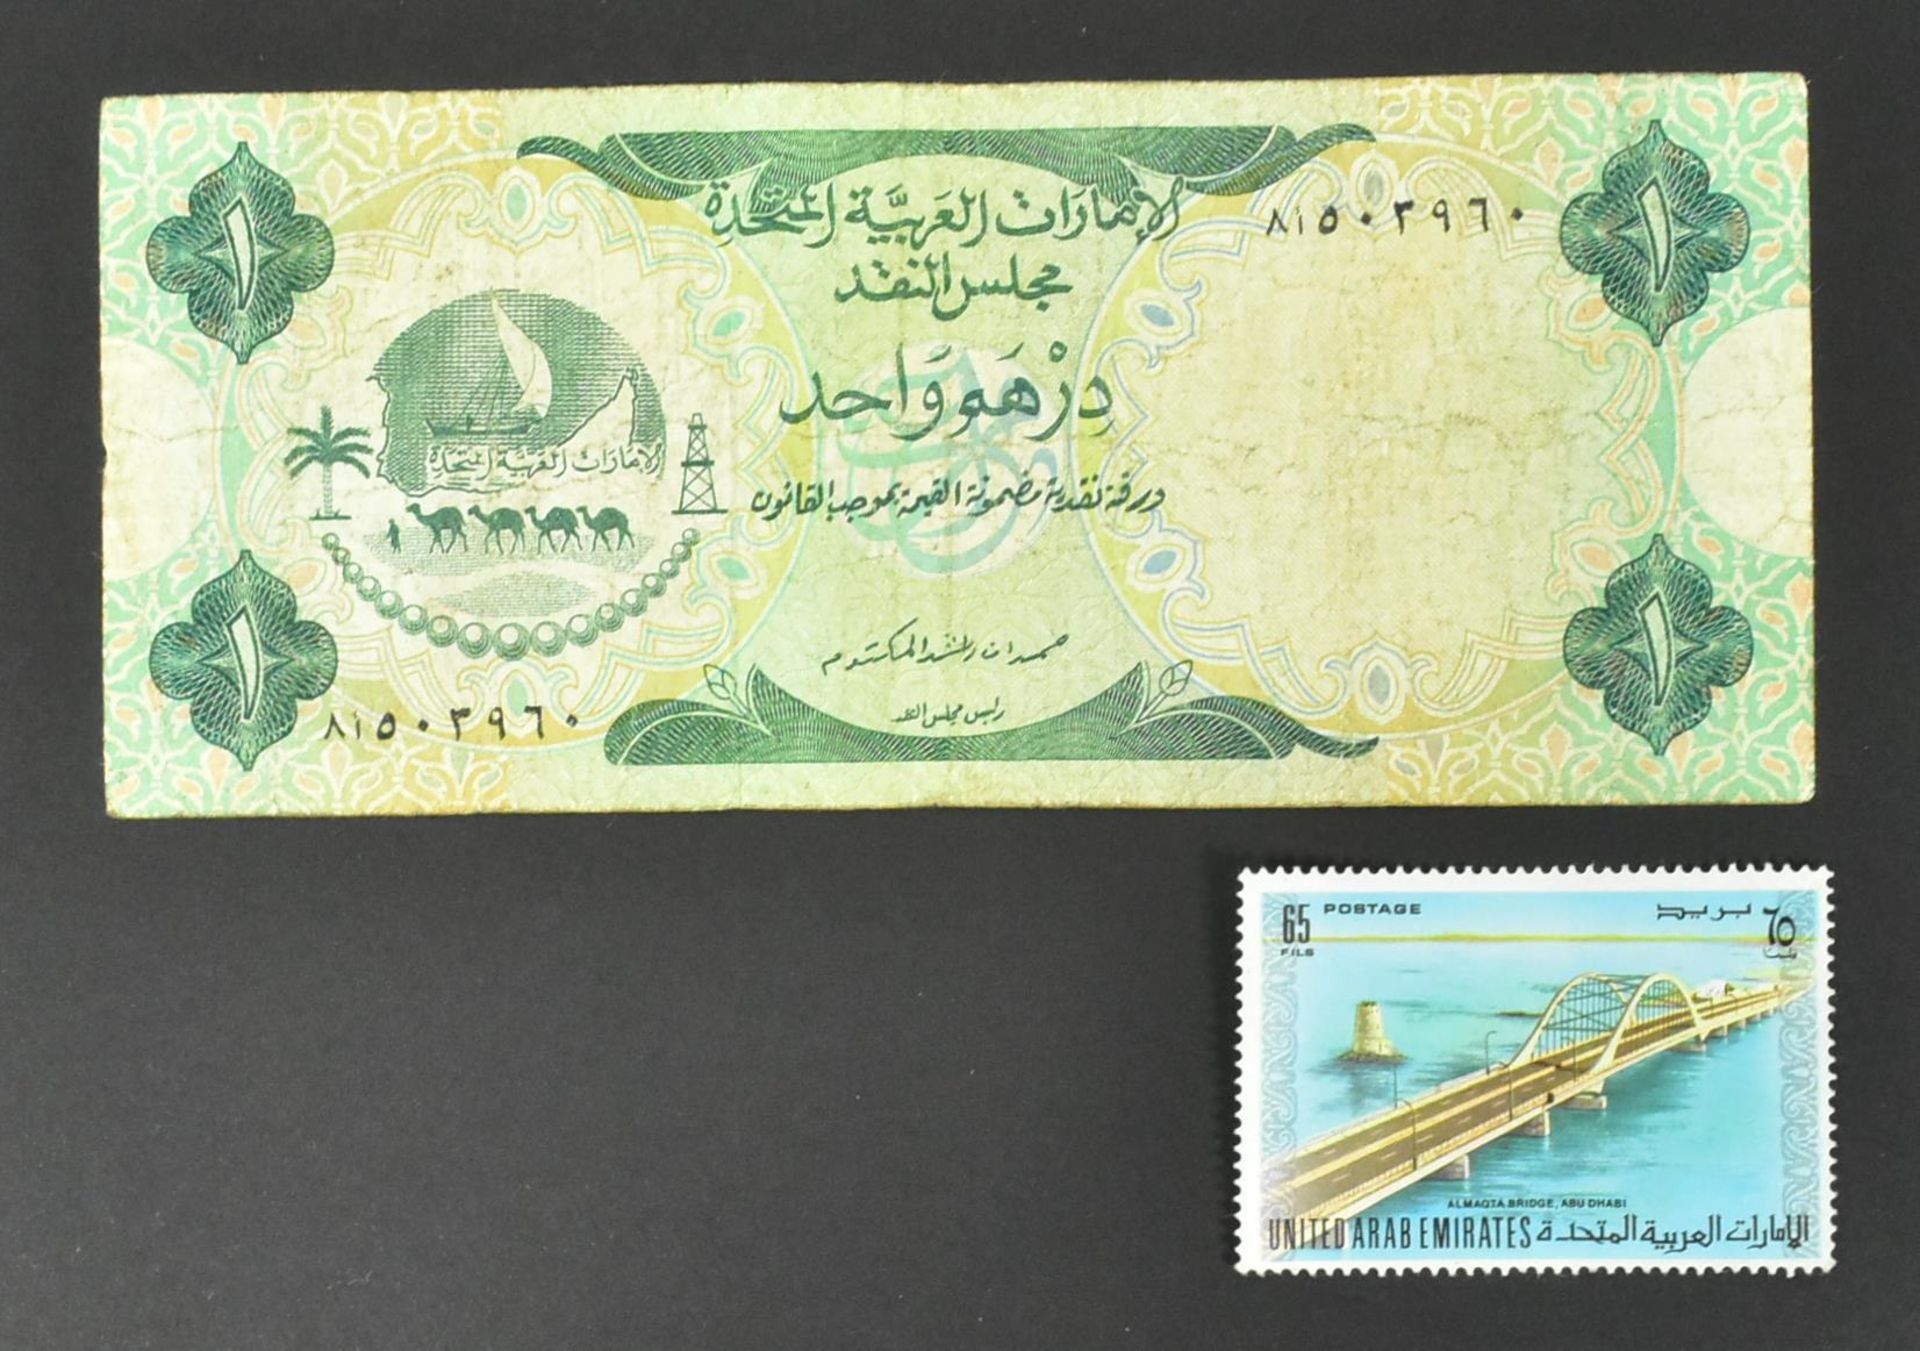 COLLECTION OF INTERNATIONAL UNCIRCULATED BANK NOTES - OMAN - Image 15 of 51